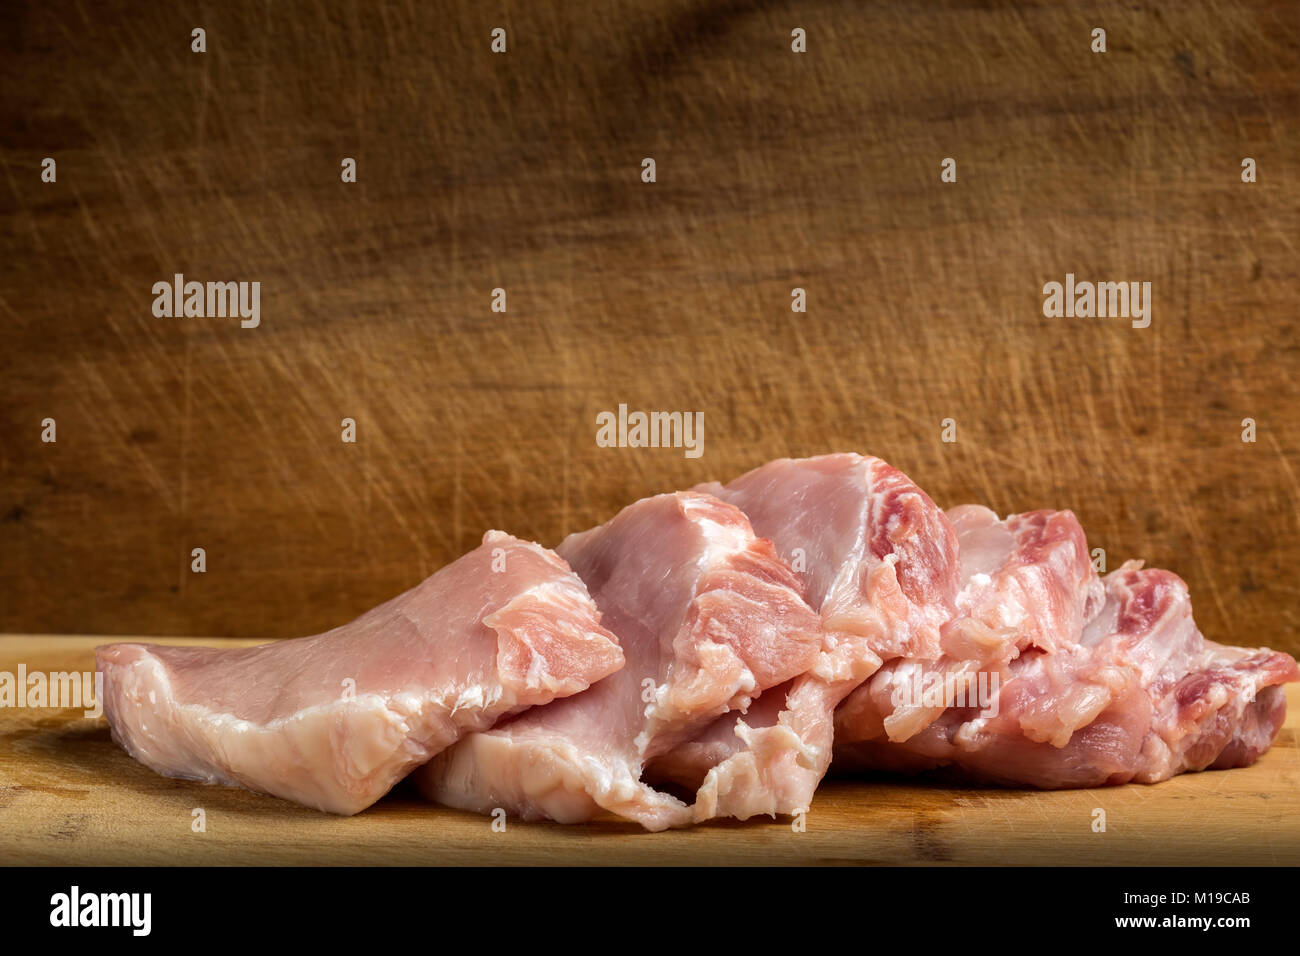 Slices of fresh pork sirloin meat on wooden cutting board Stock Photo